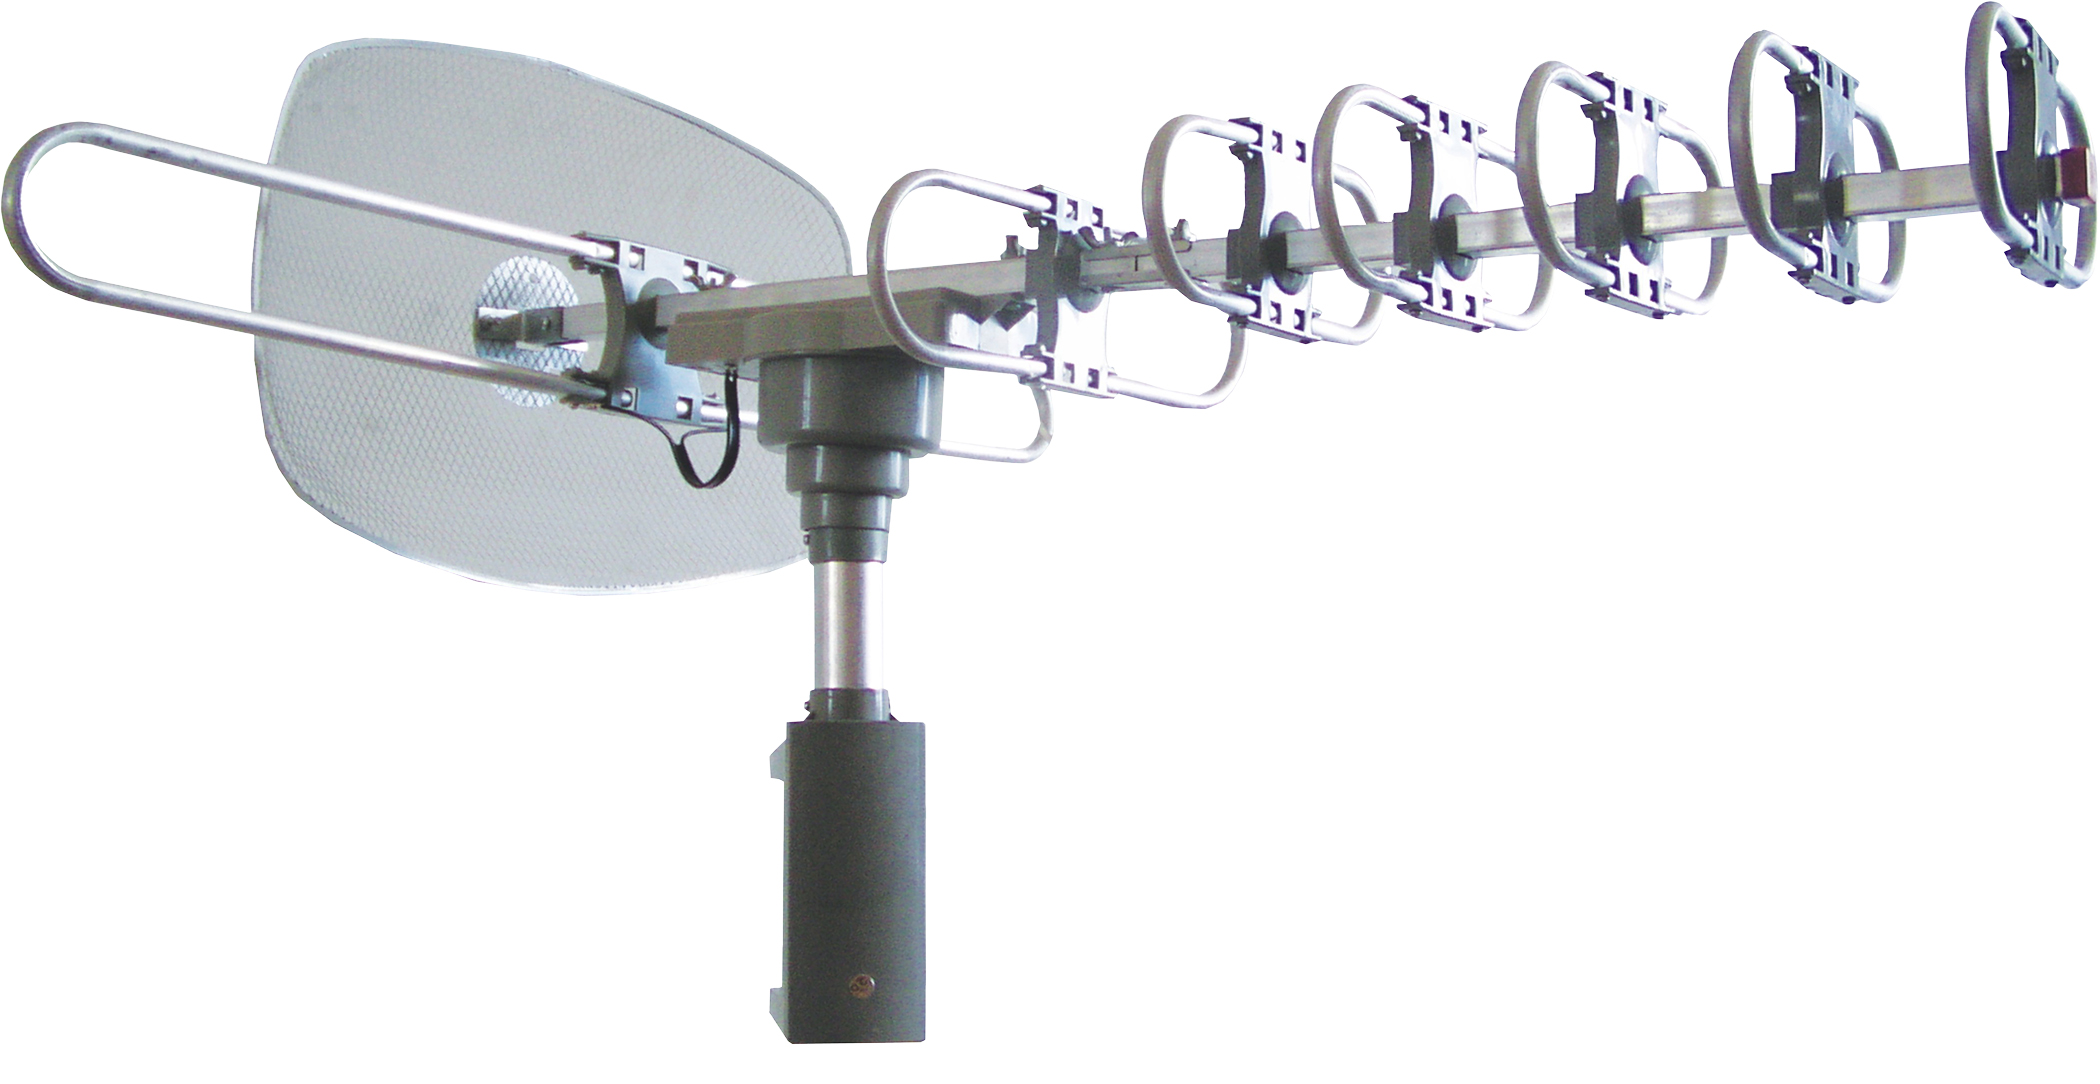 High Powered Amplified Motorized Outdoor Antenna Suitable for HDTV and ATSC Digital Television